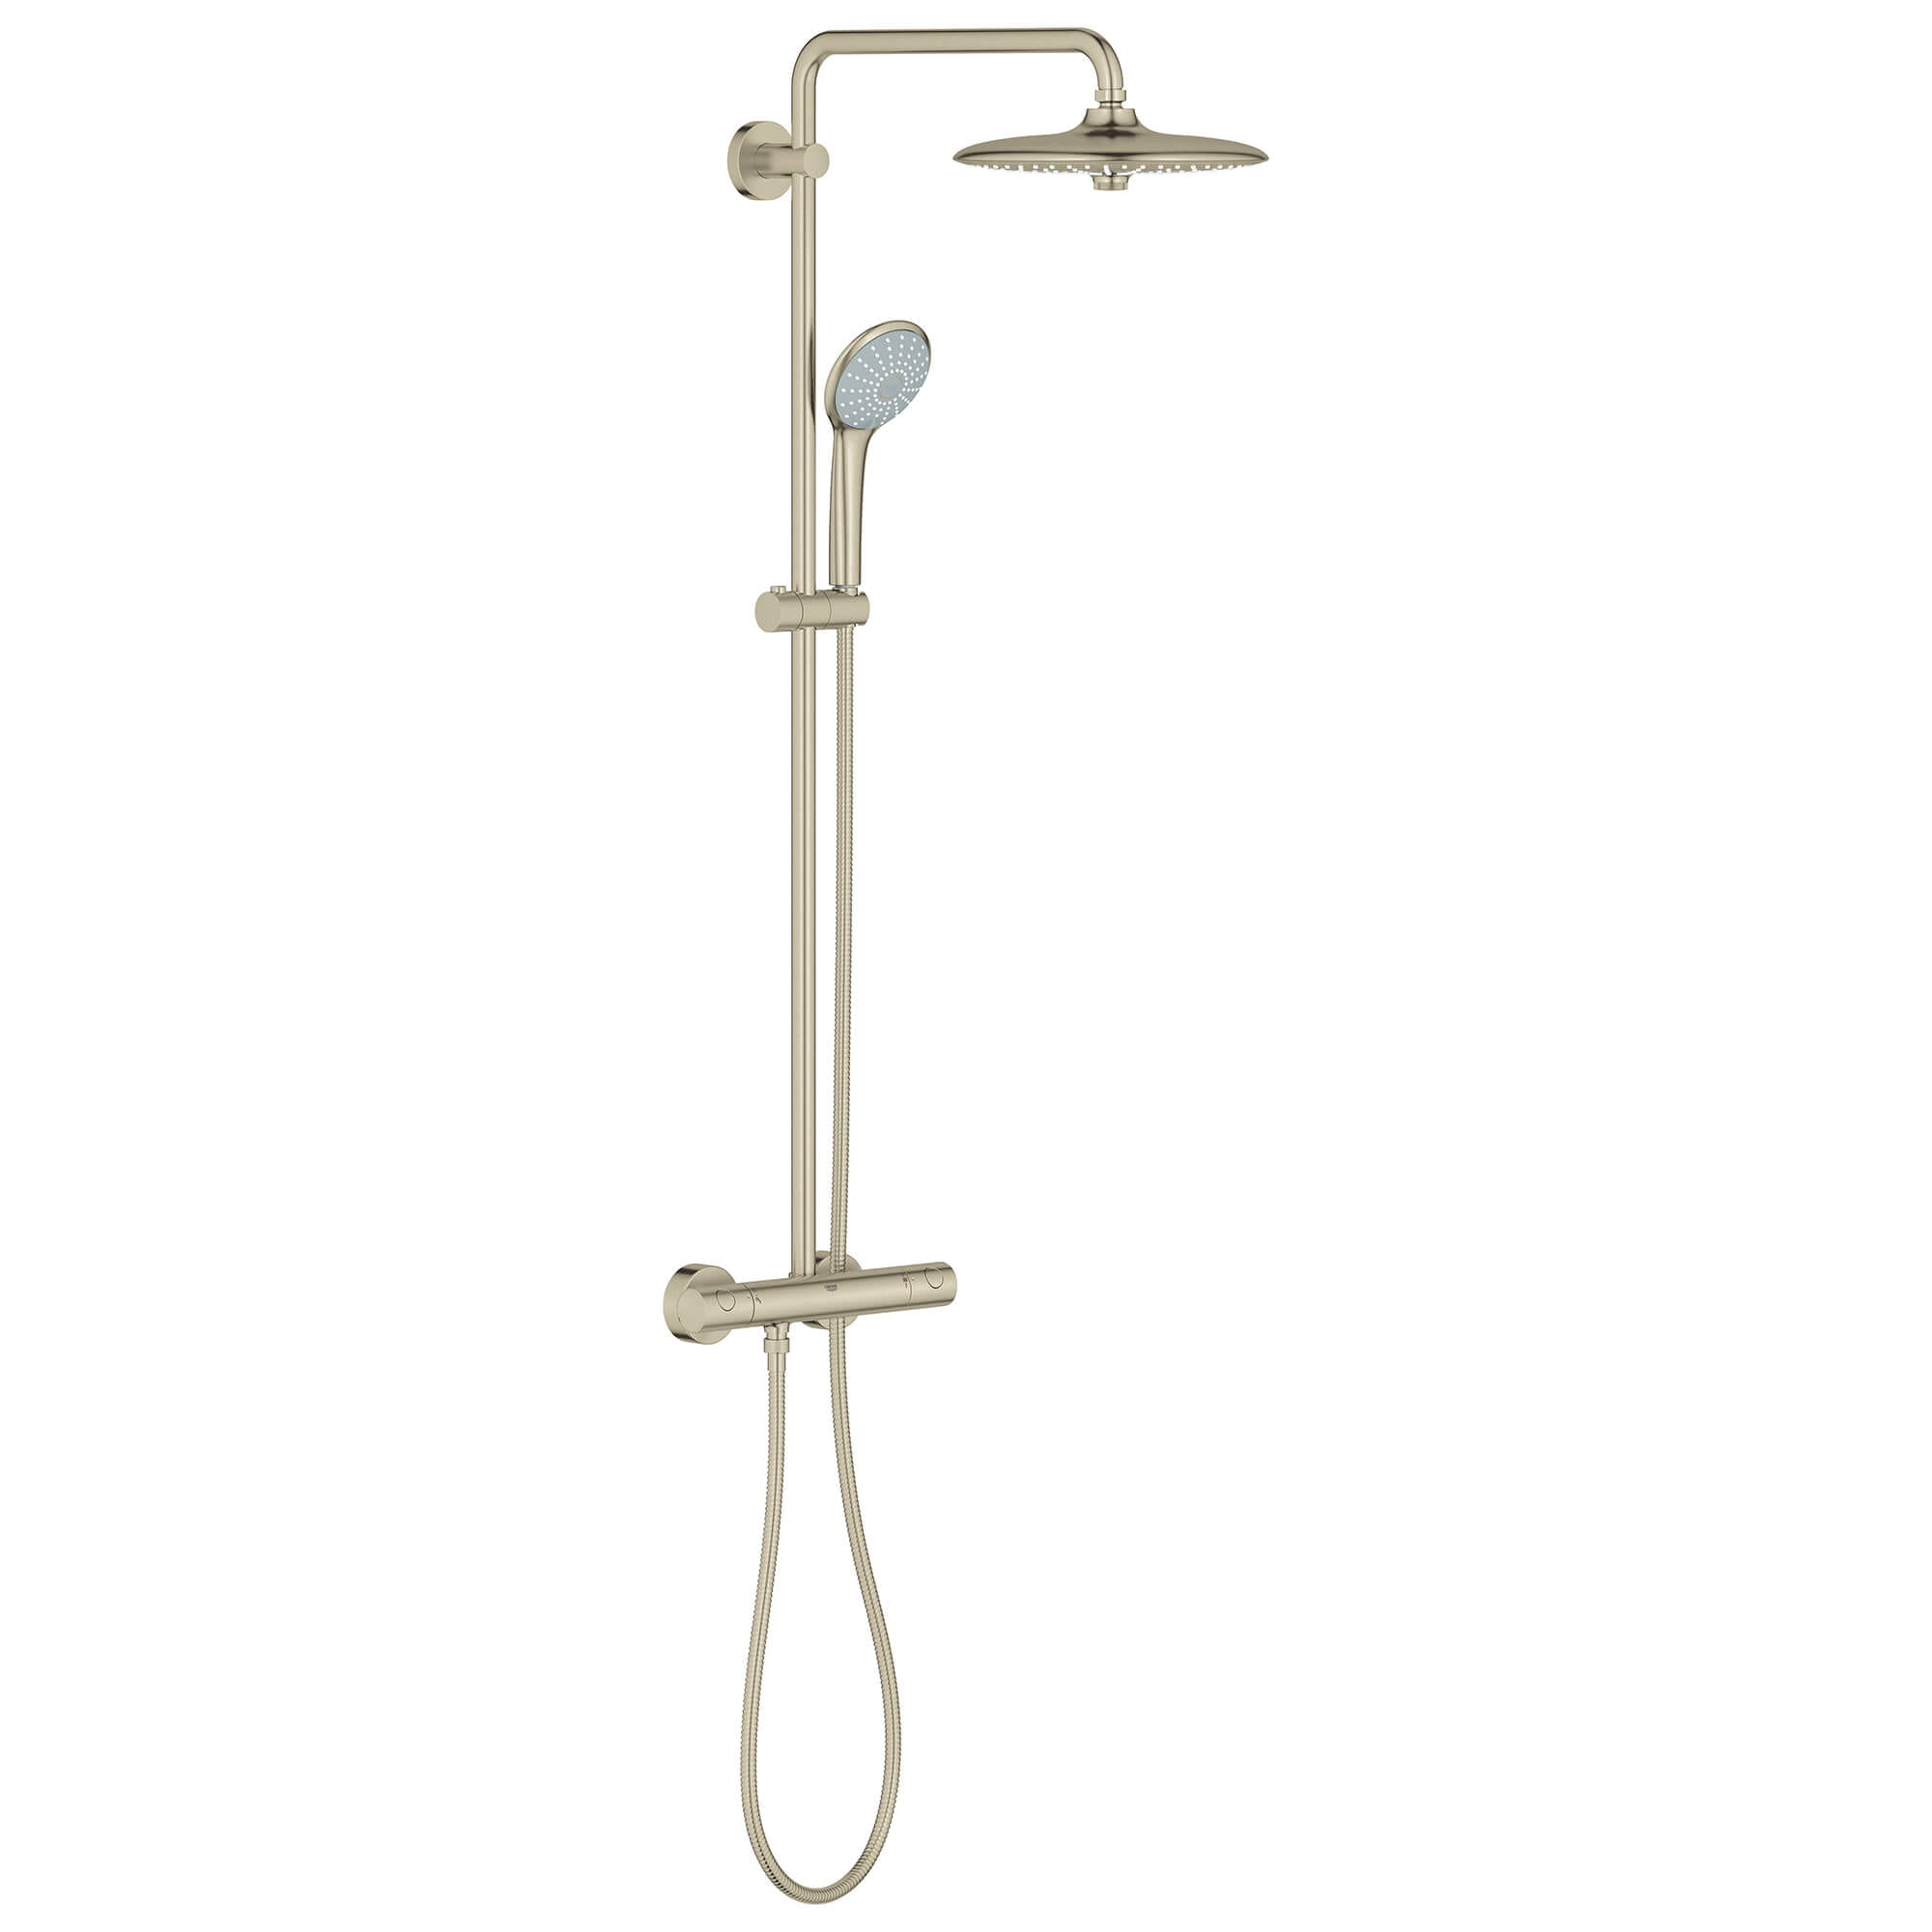 Thermostatic Shower System 25 gpm GROHE BRUSHED NICKEL